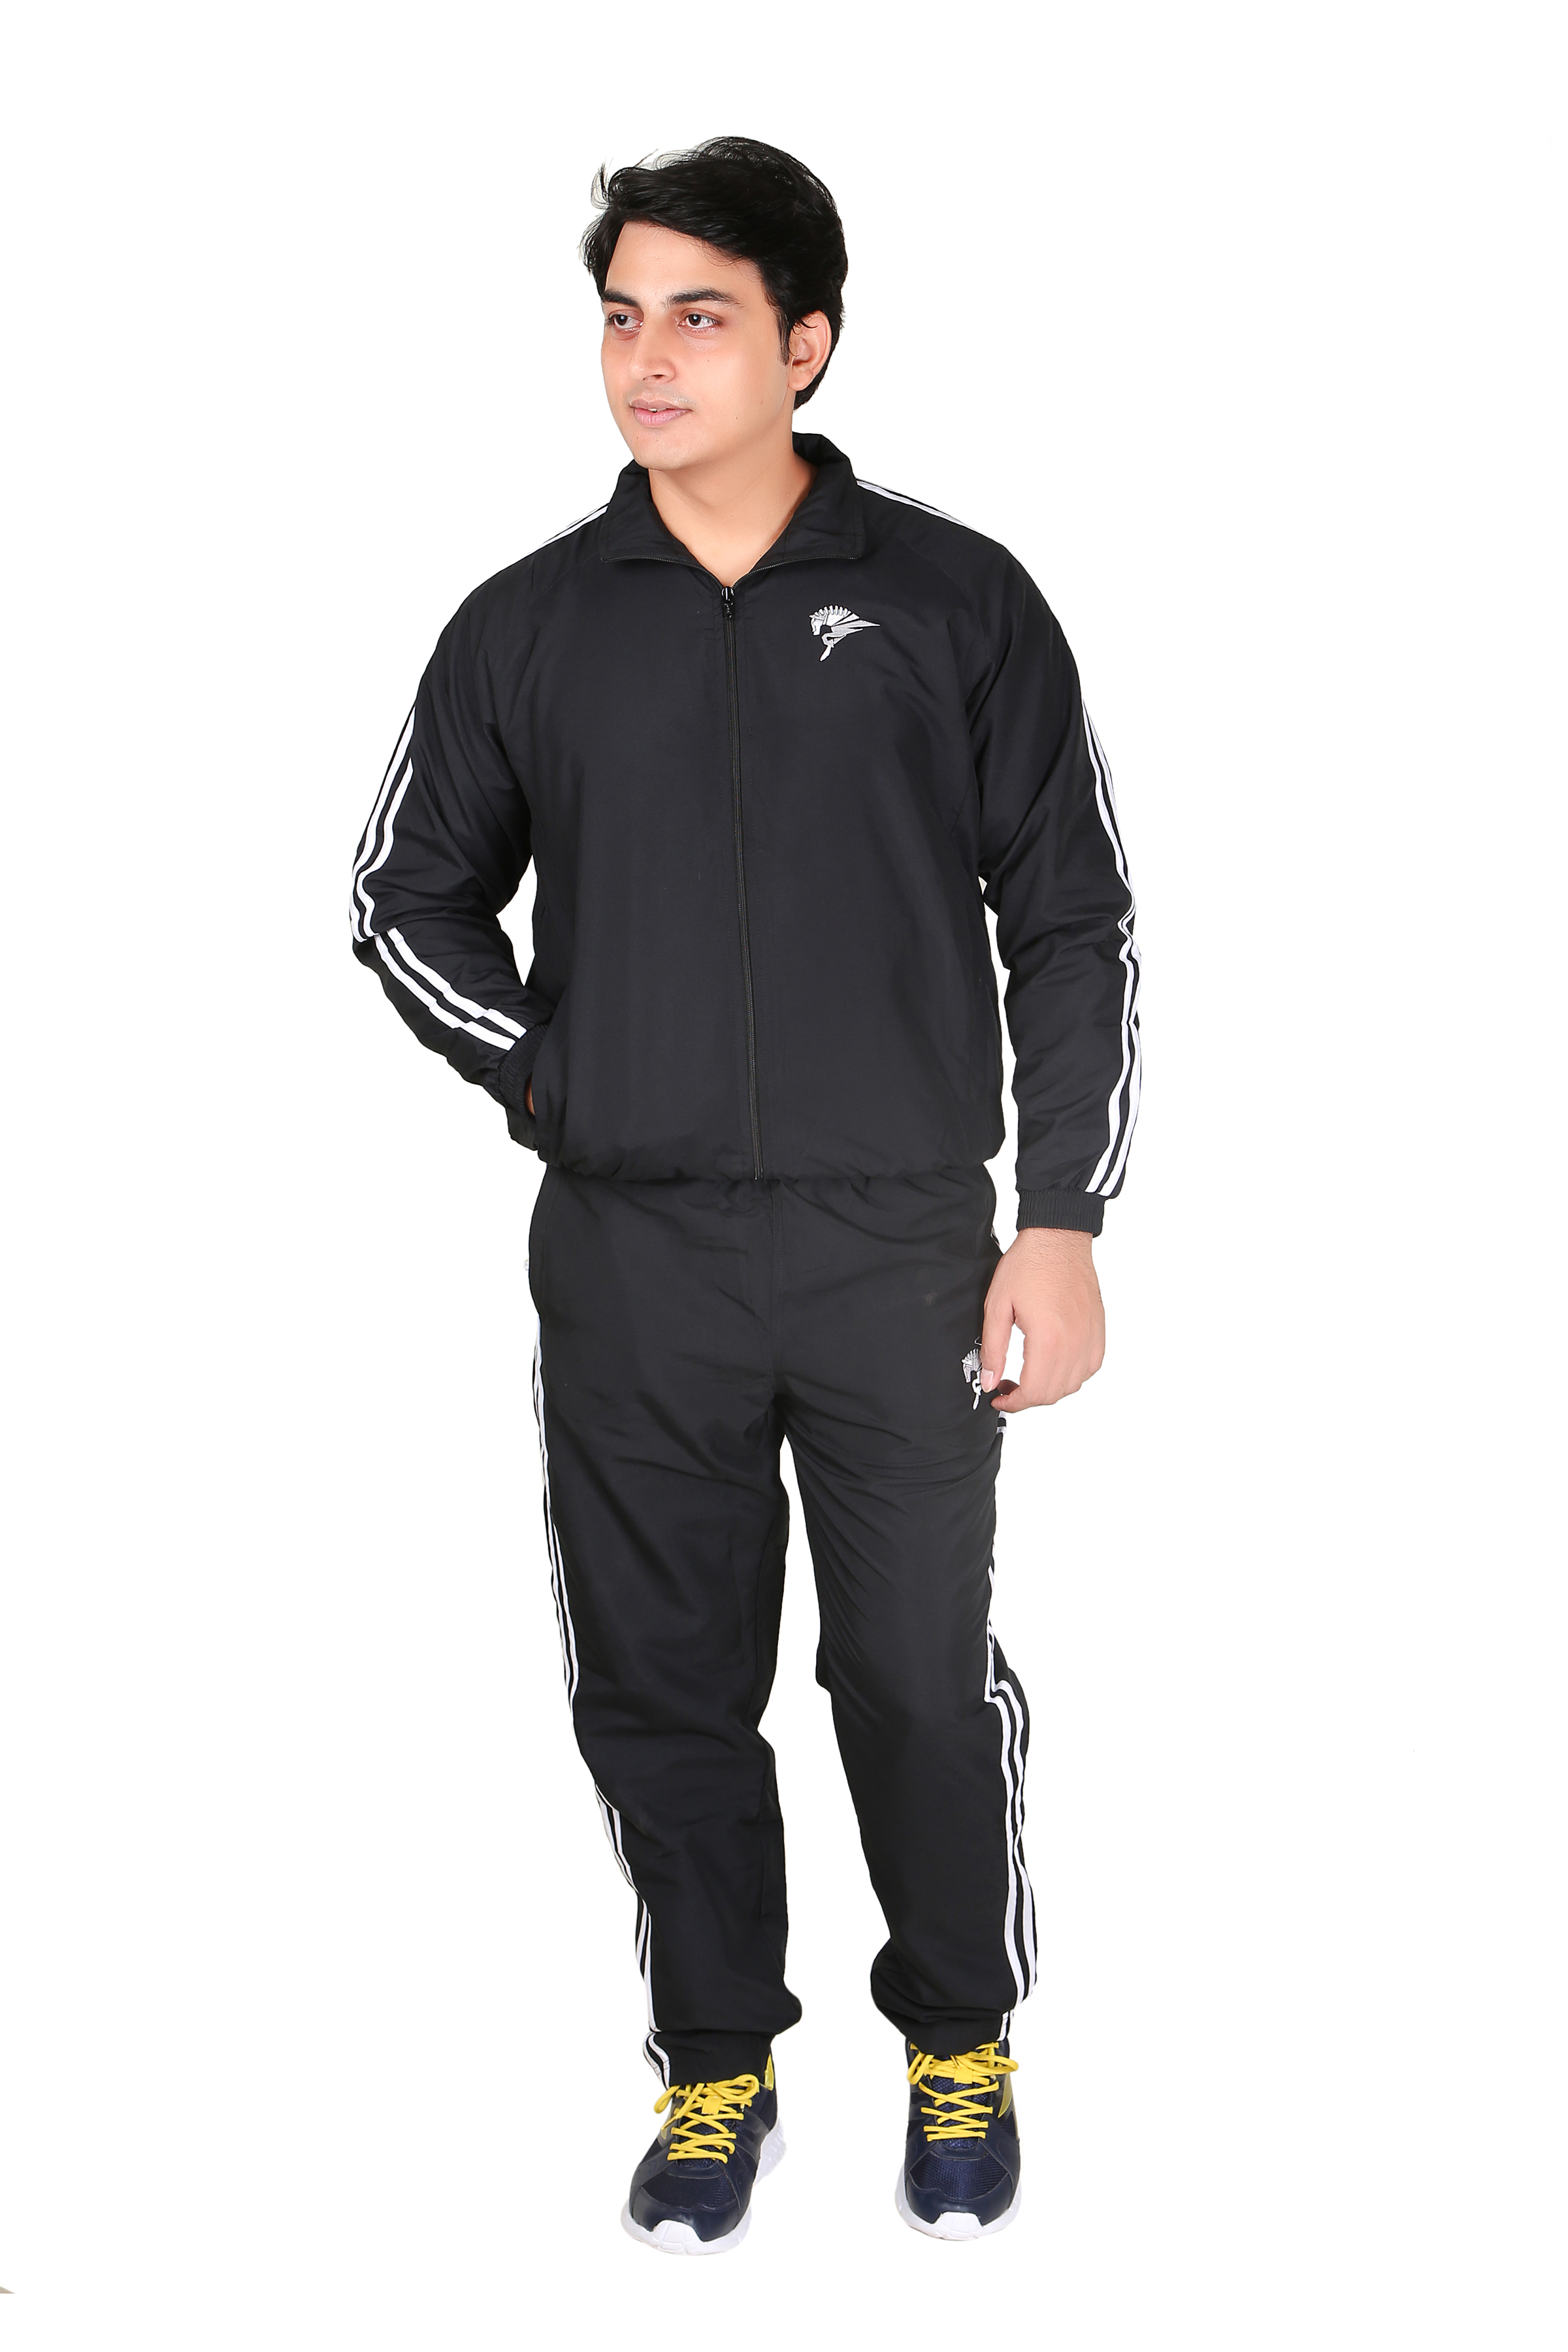 Buy Stallions Tracksuit Black Online @ ₹1999 from ShopClues